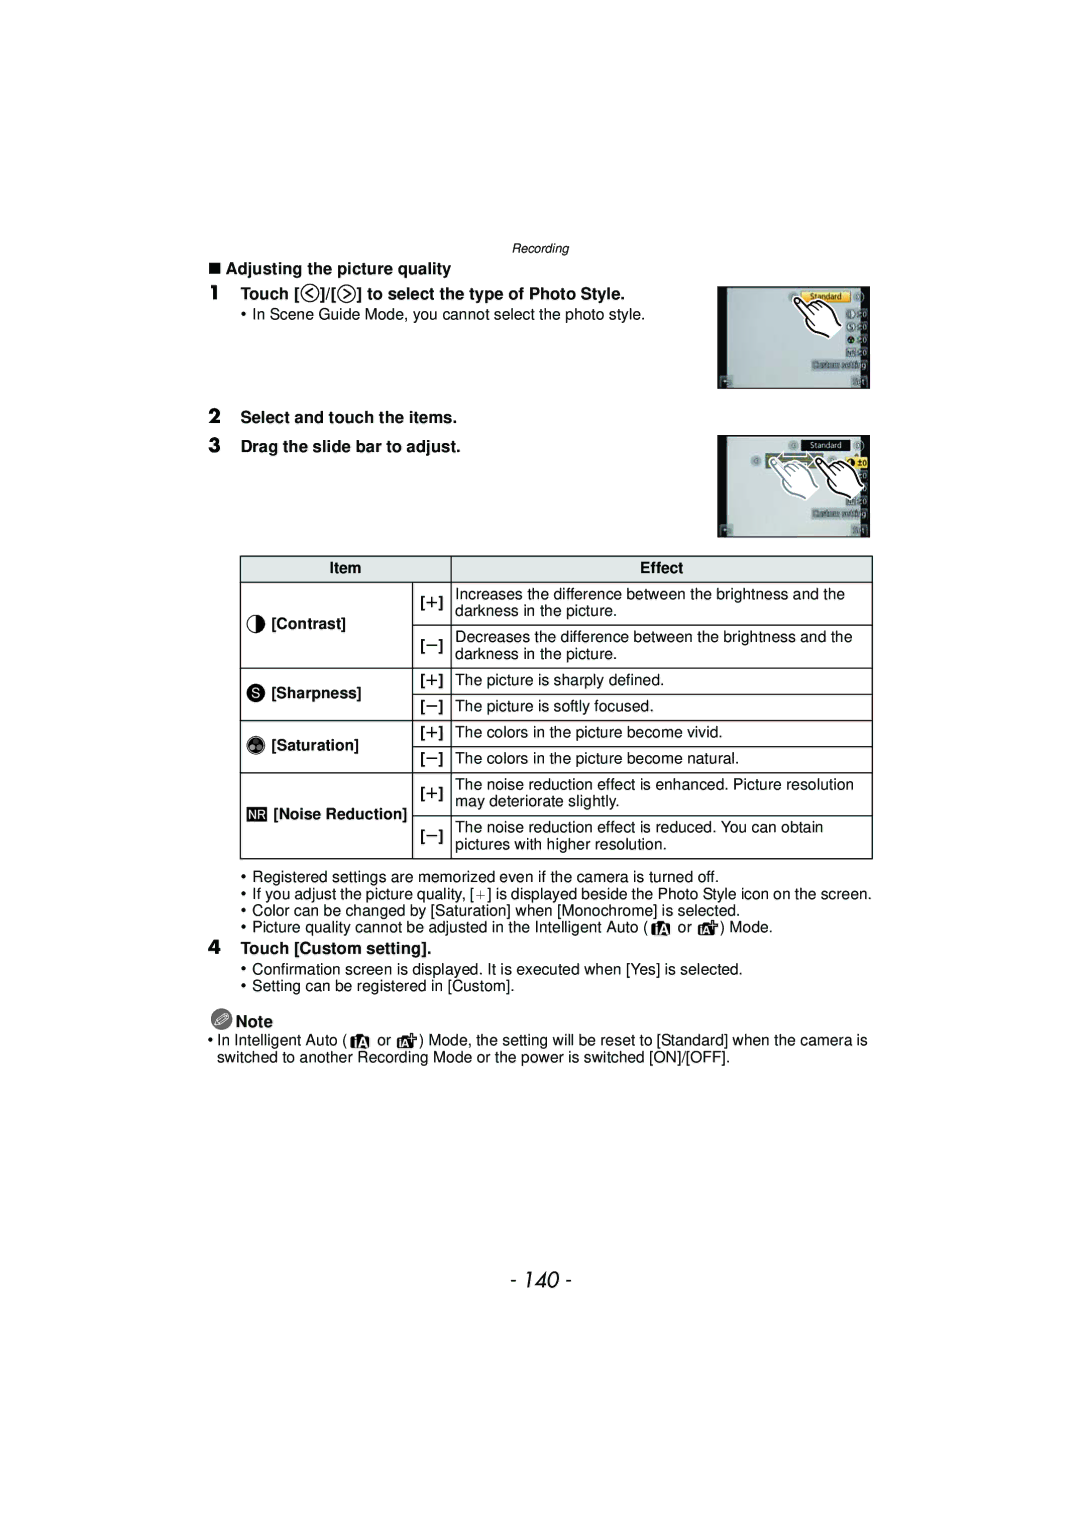 Panasonic DMC-GF5 owner manual 140, Select and touch the items Drag the slide bar to adjust, Touch Custom setting, Effect 